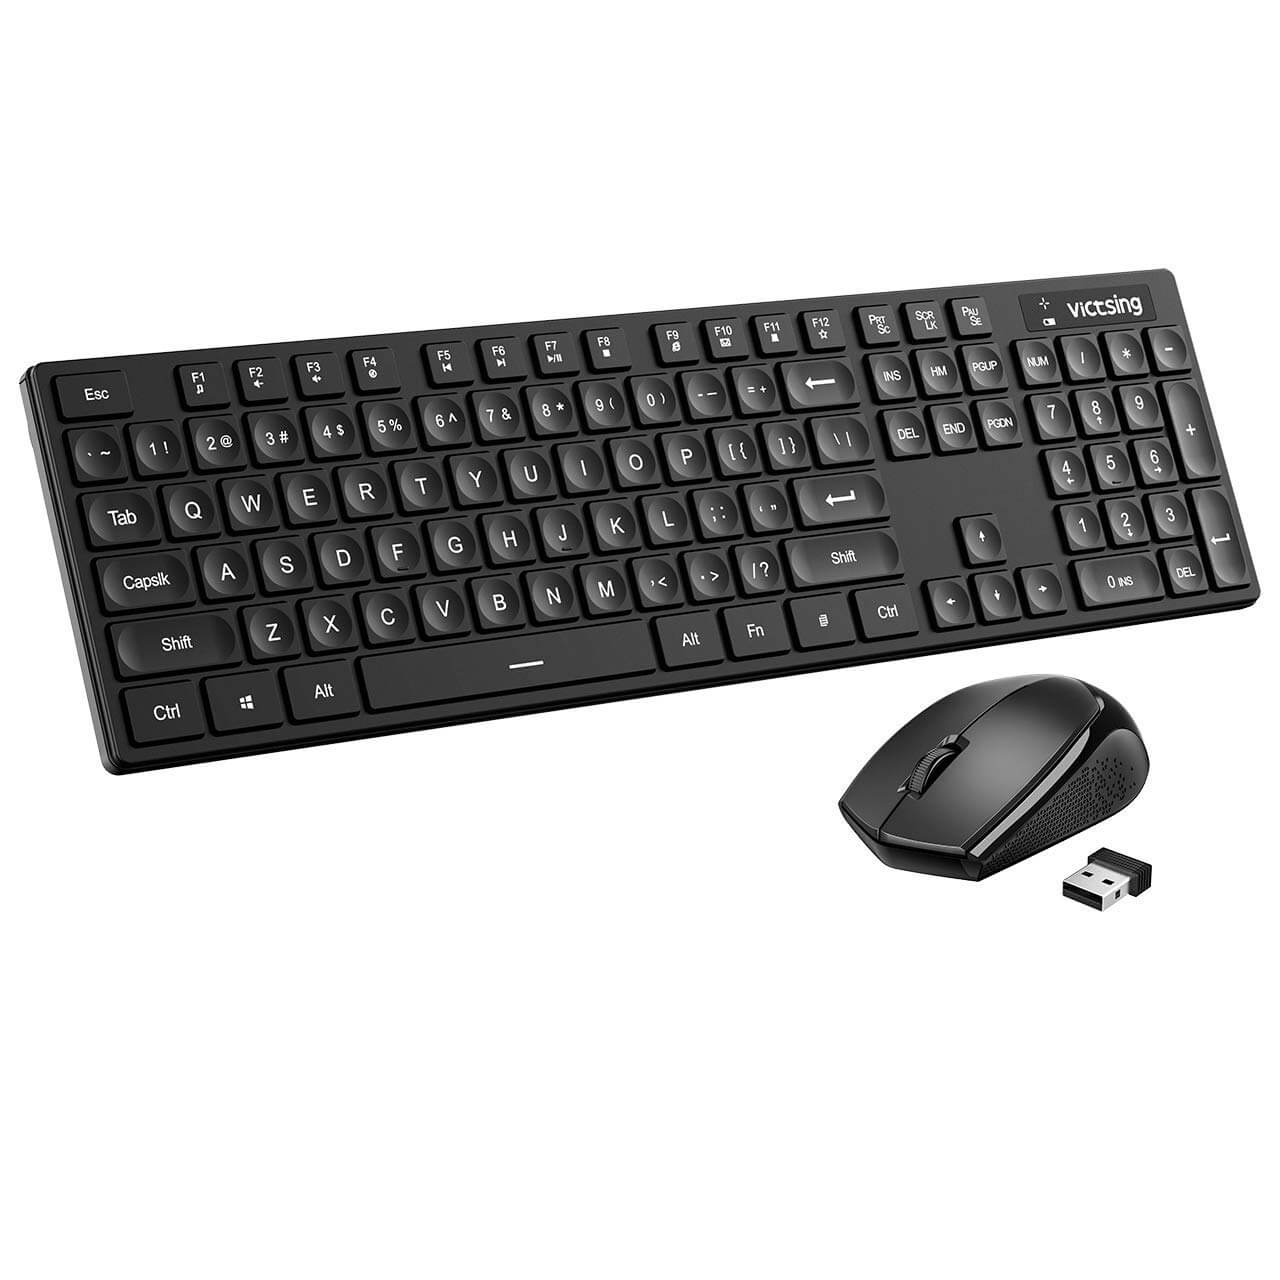 Best wireless keyboard and mouse deals 2020 Guide